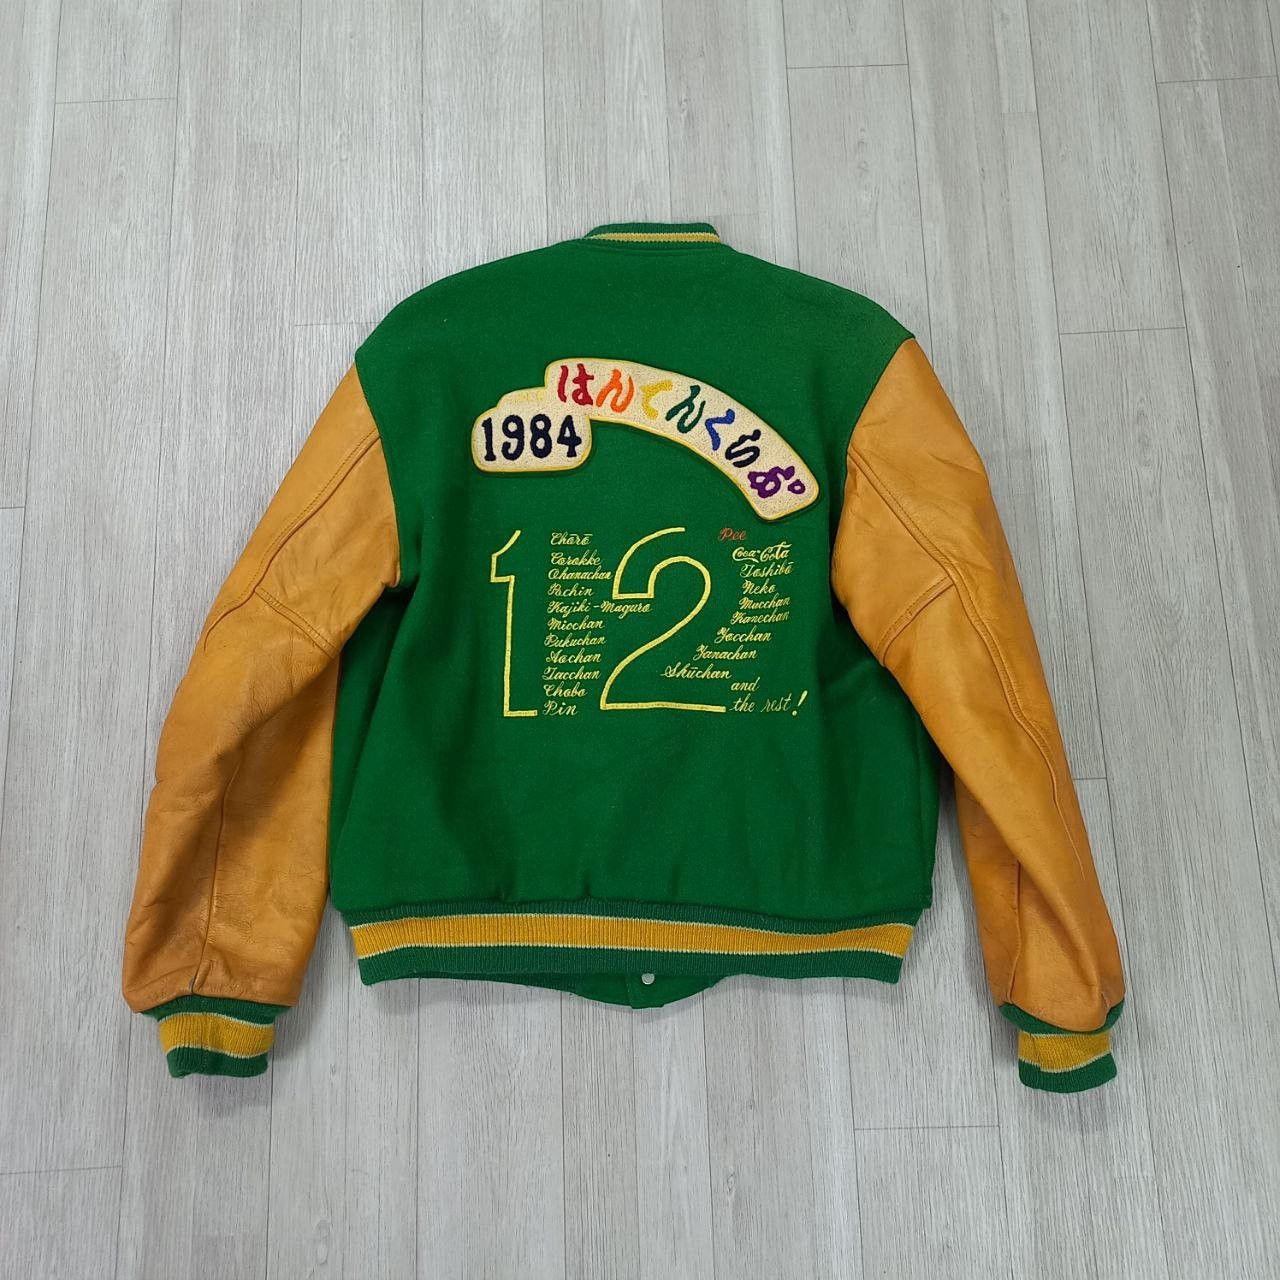 Union Made - HANTEN CLUB 1984 by BUTWIN USA Wool Leather Varsity Jacket - 3